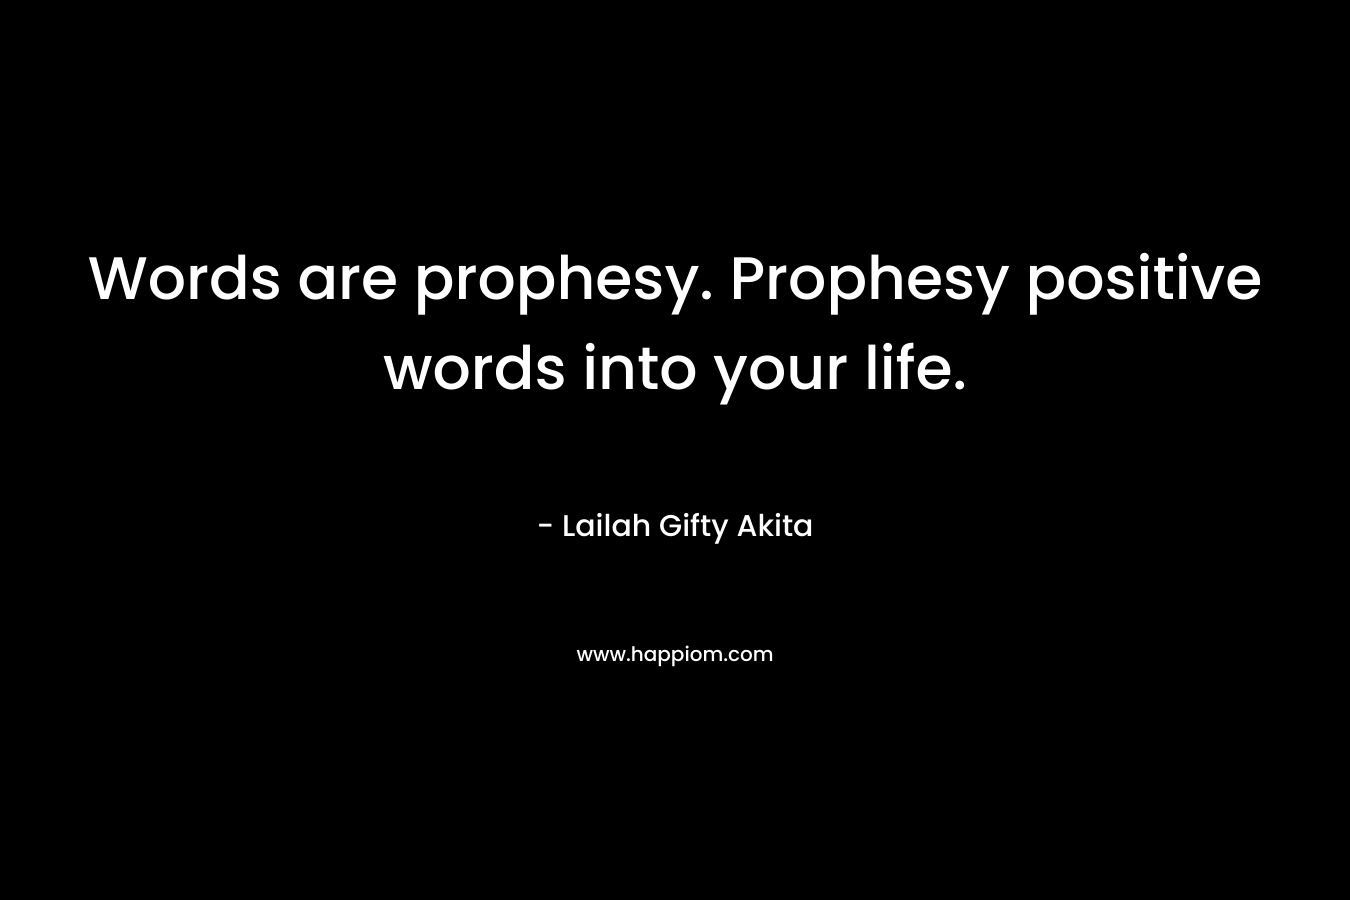 Words are prophesy. Prophesy positive words into your life.